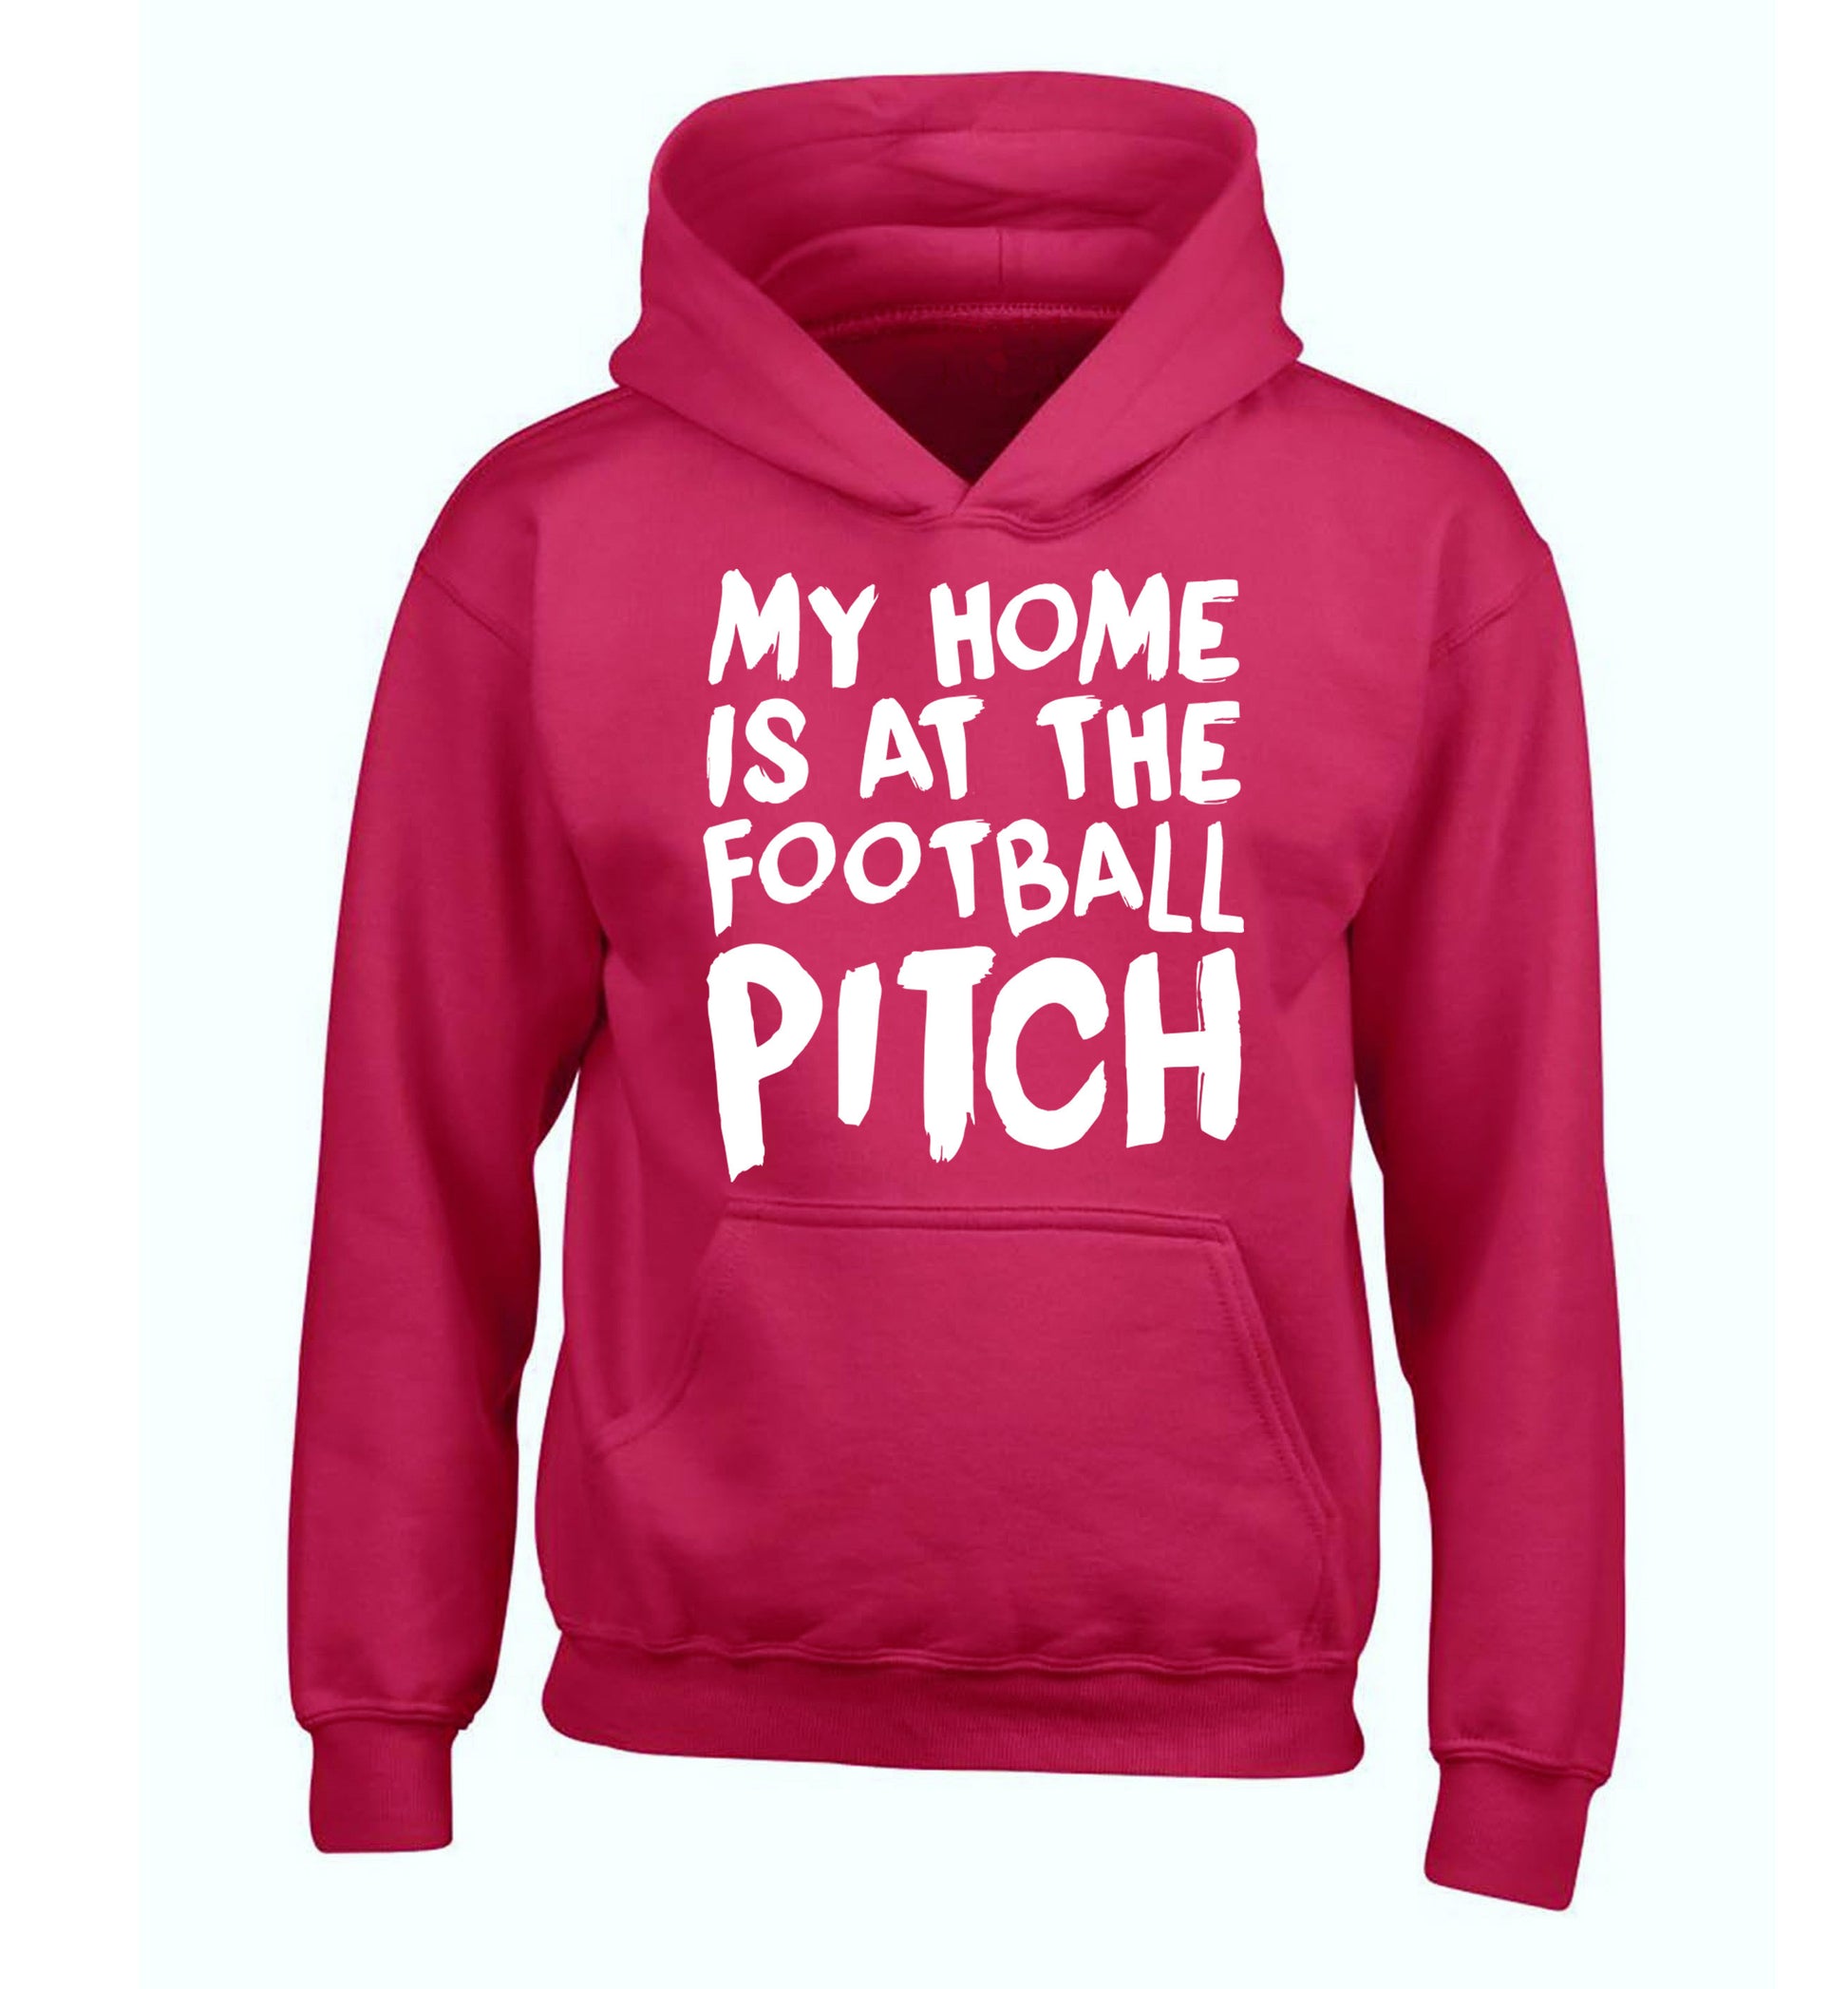 My home is at the football pitch children's pink hoodie 12-14 Years